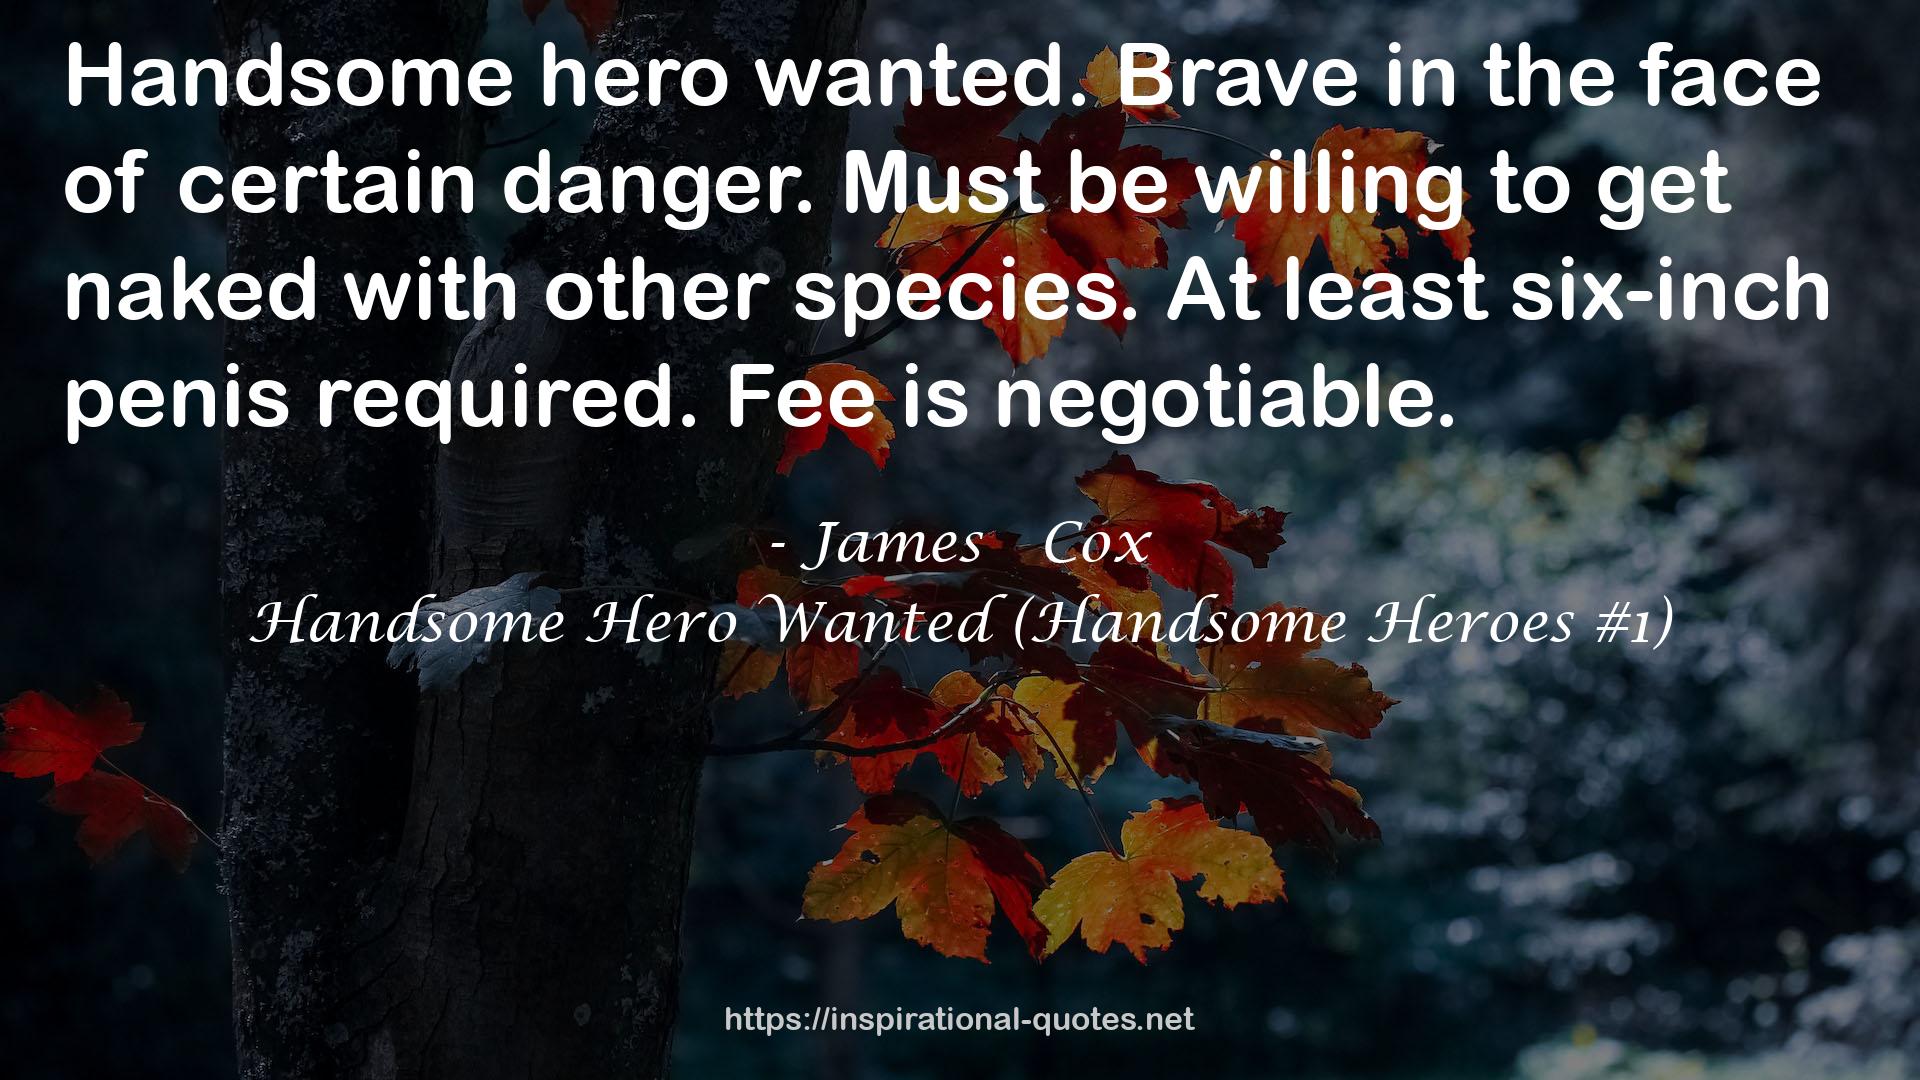 Handsome Hero Wanted (Handsome Heroes #1) QUOTES